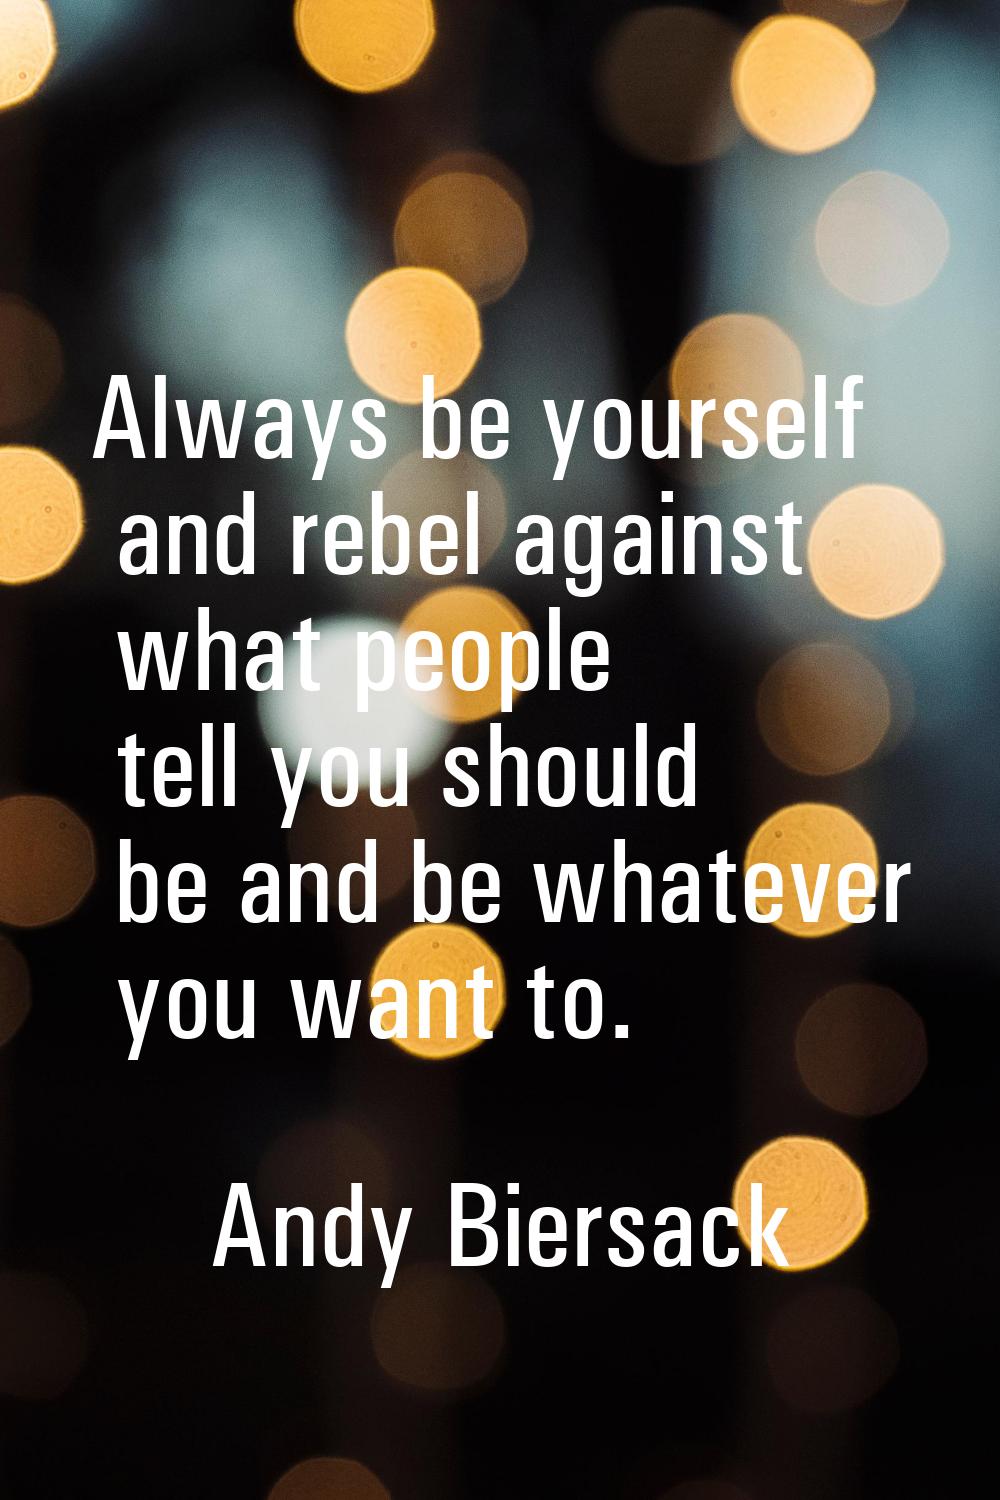 Always be yourself and rebel against what people tell you should be and be whatever you want to.